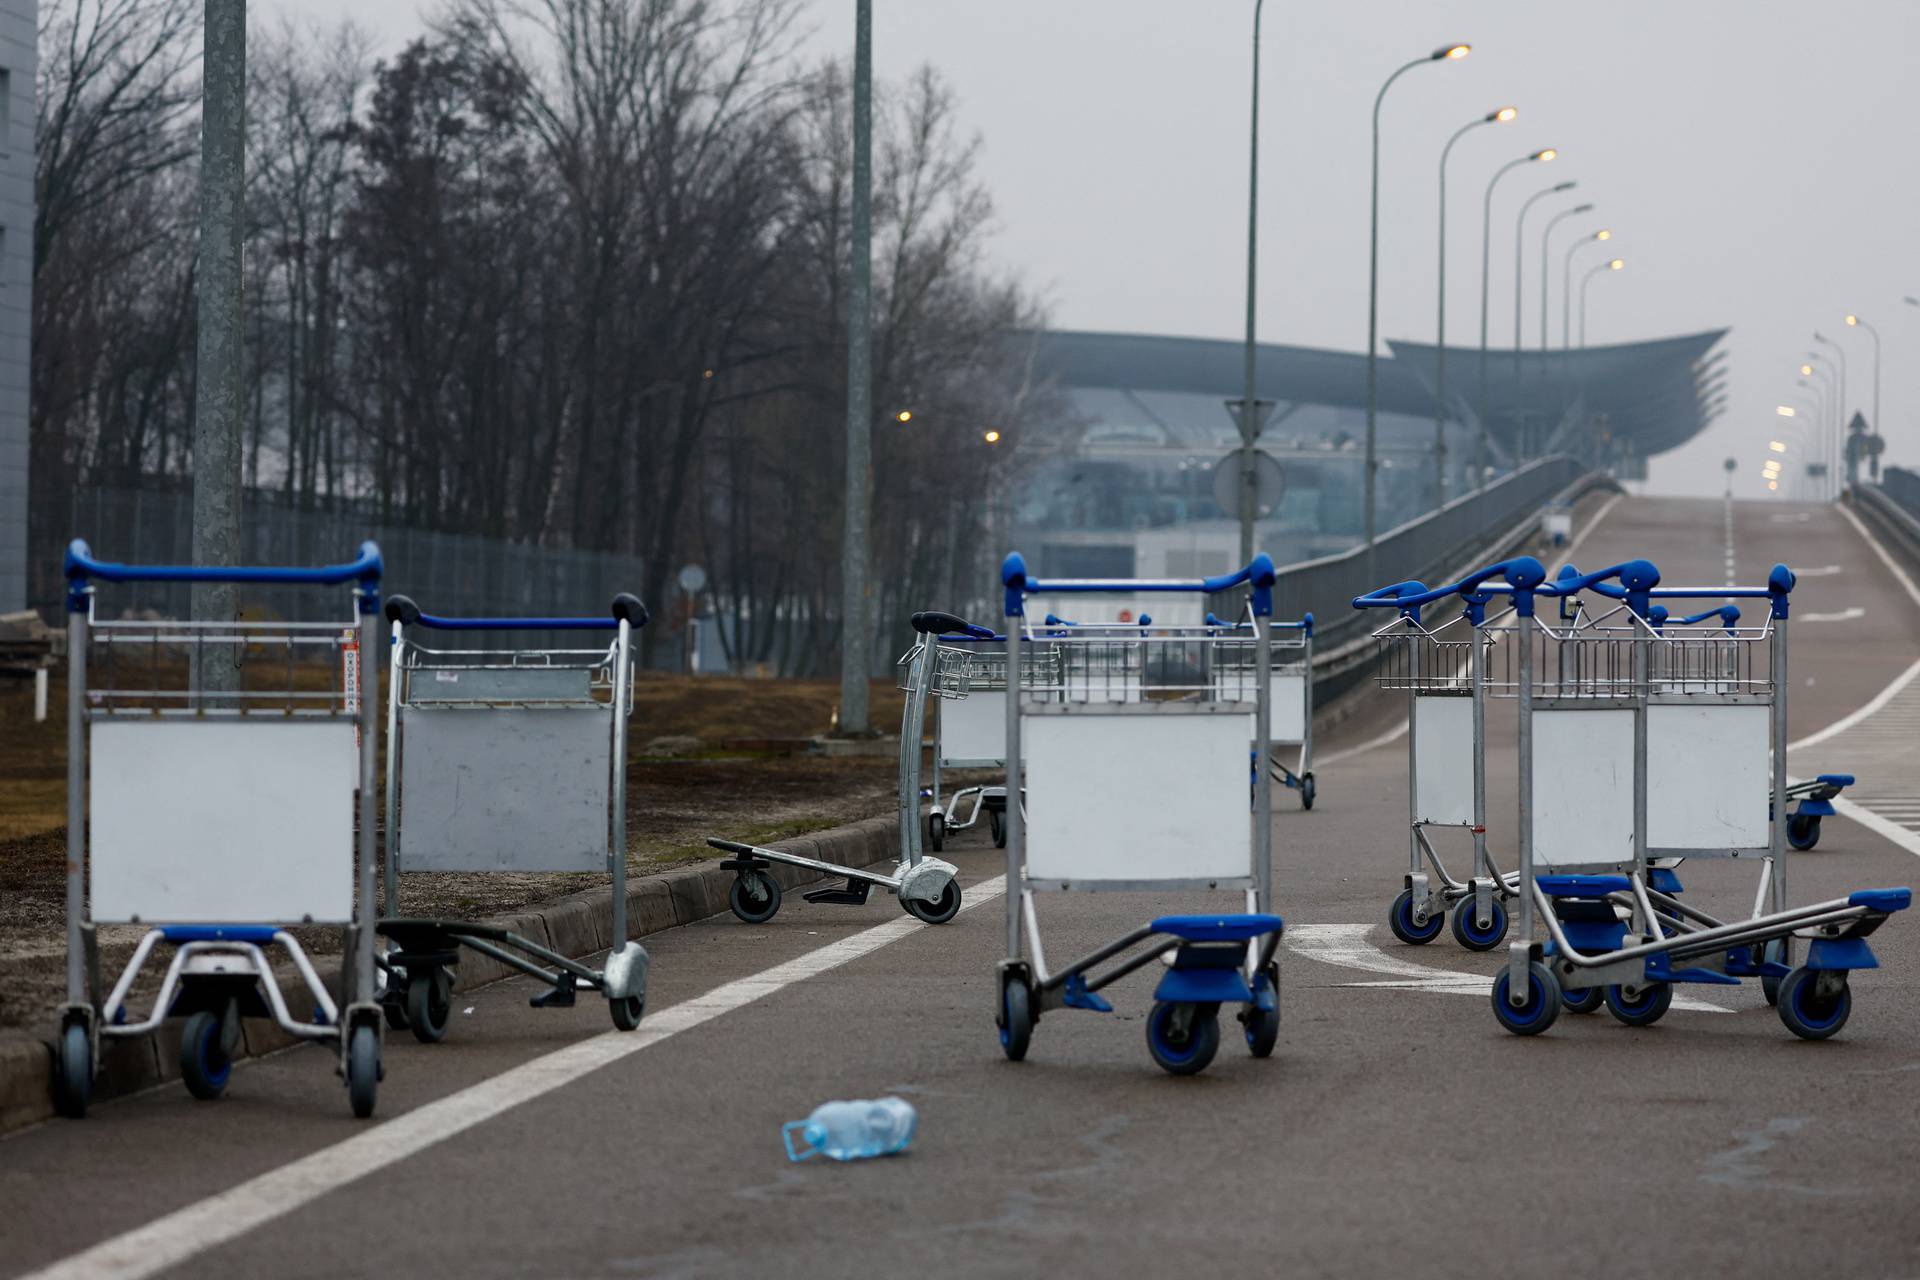 Luggage carts are seen at Kyiv Airport after Russian President Vladimir Putin authorized a military operation in eastern Ukraine